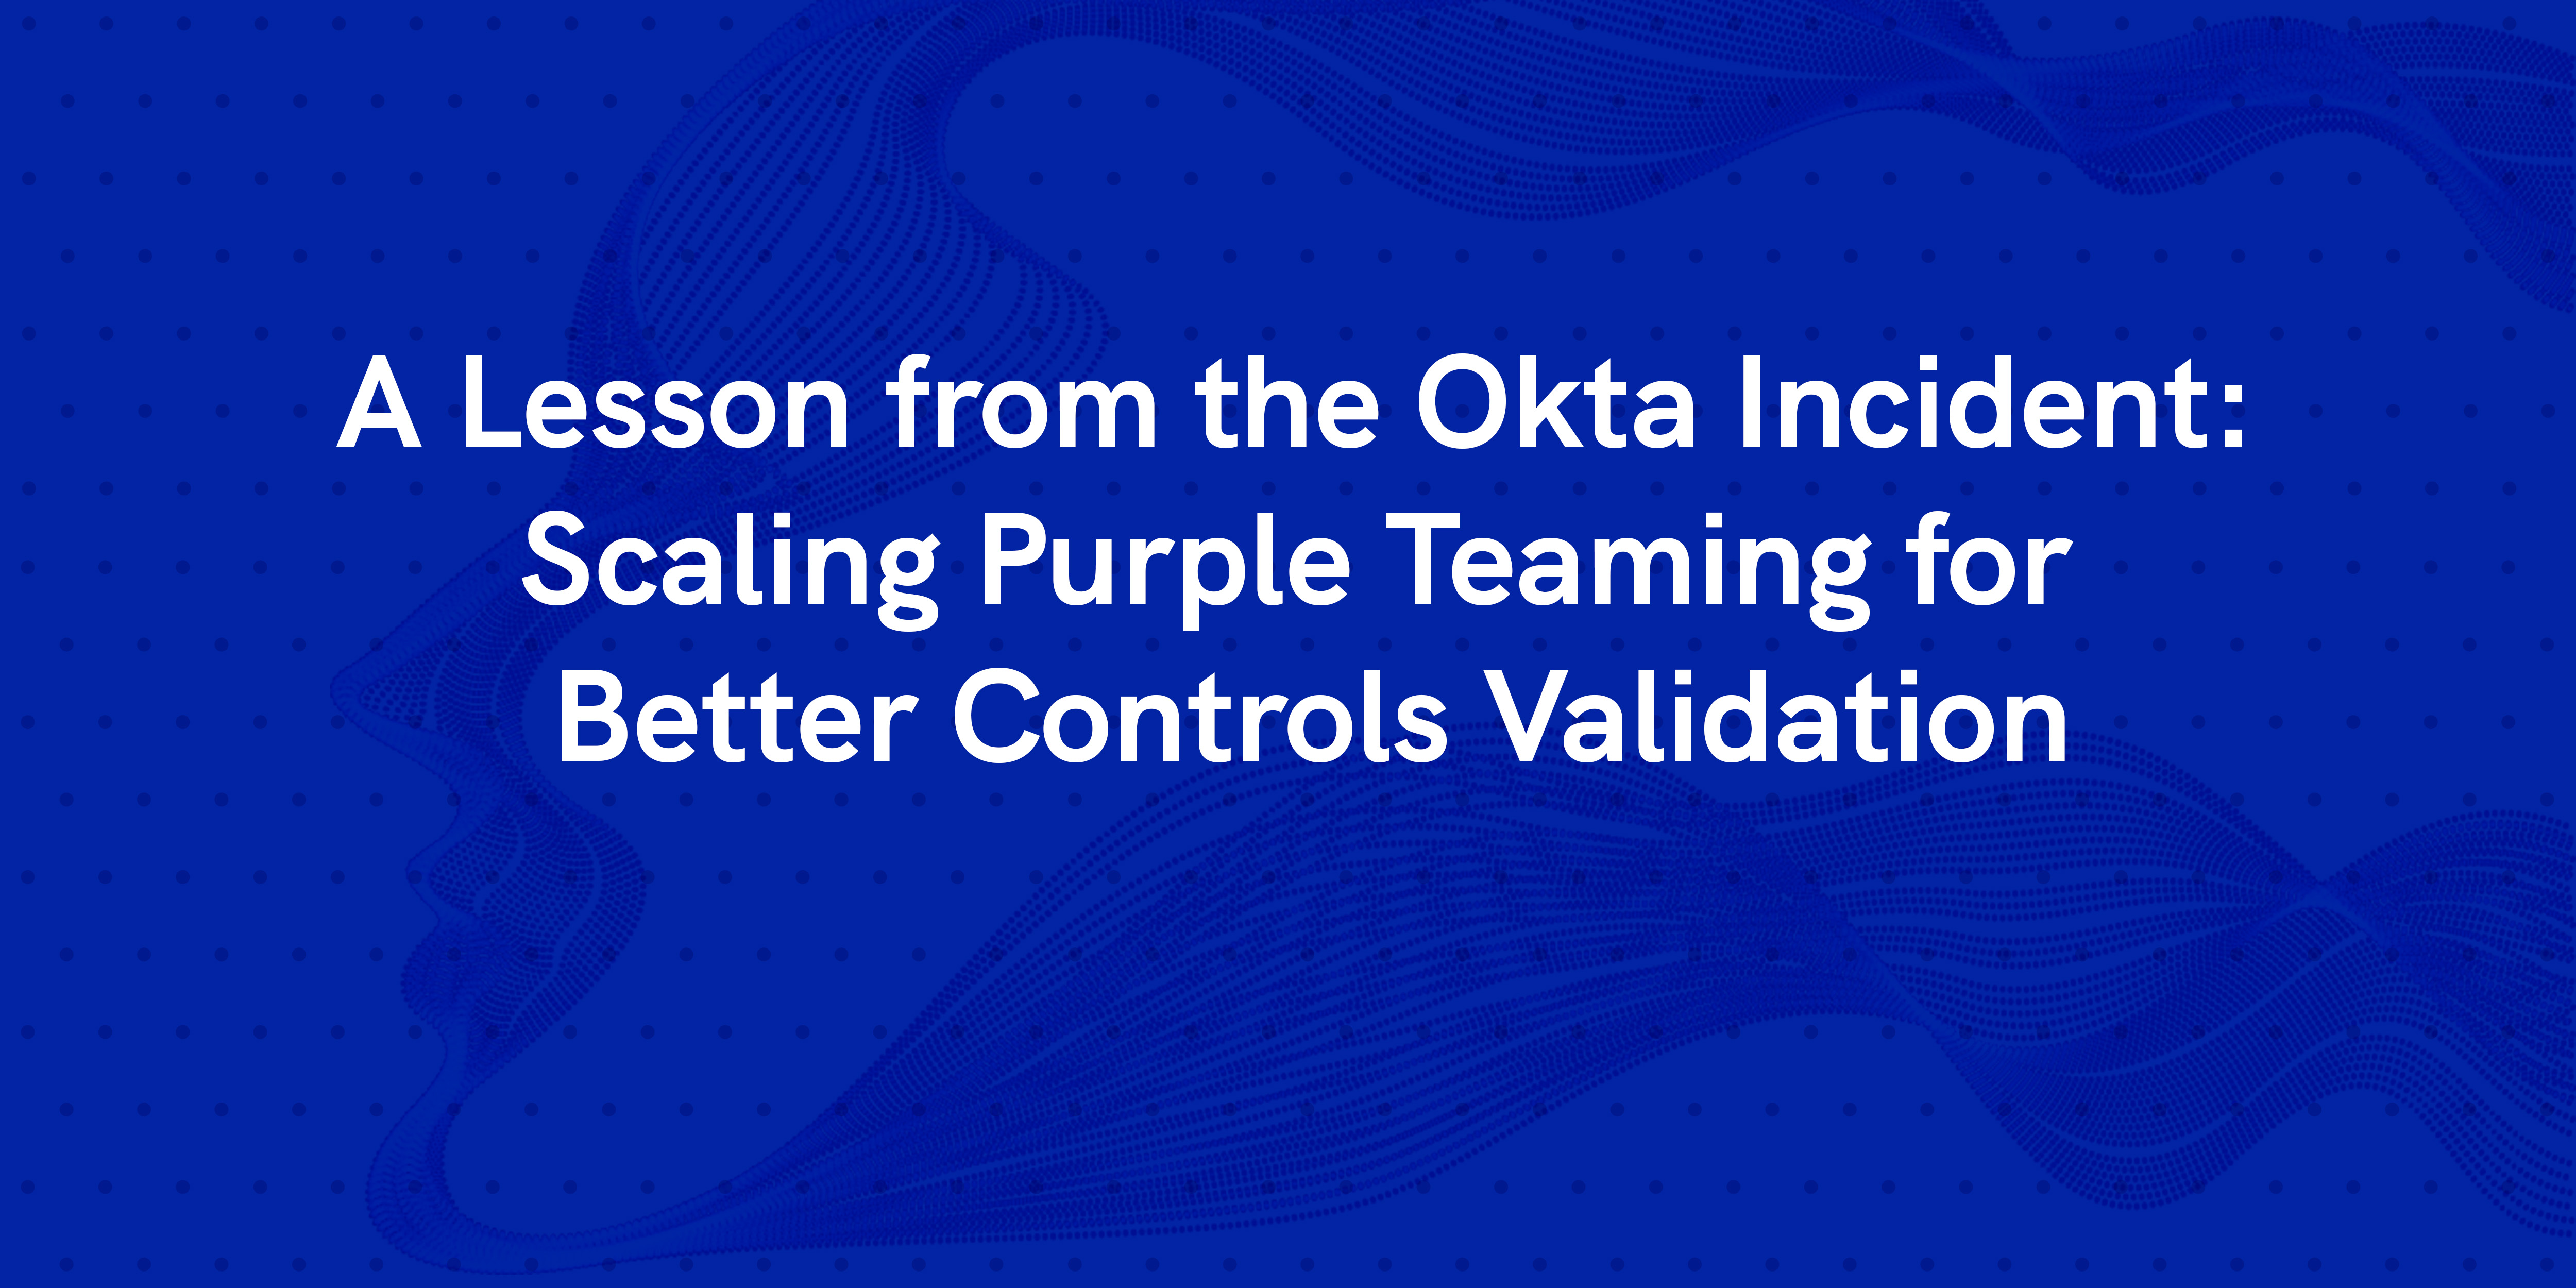 A Lesson from the Okta Incident: Scaling Purple Teaming for Better Controls Validation